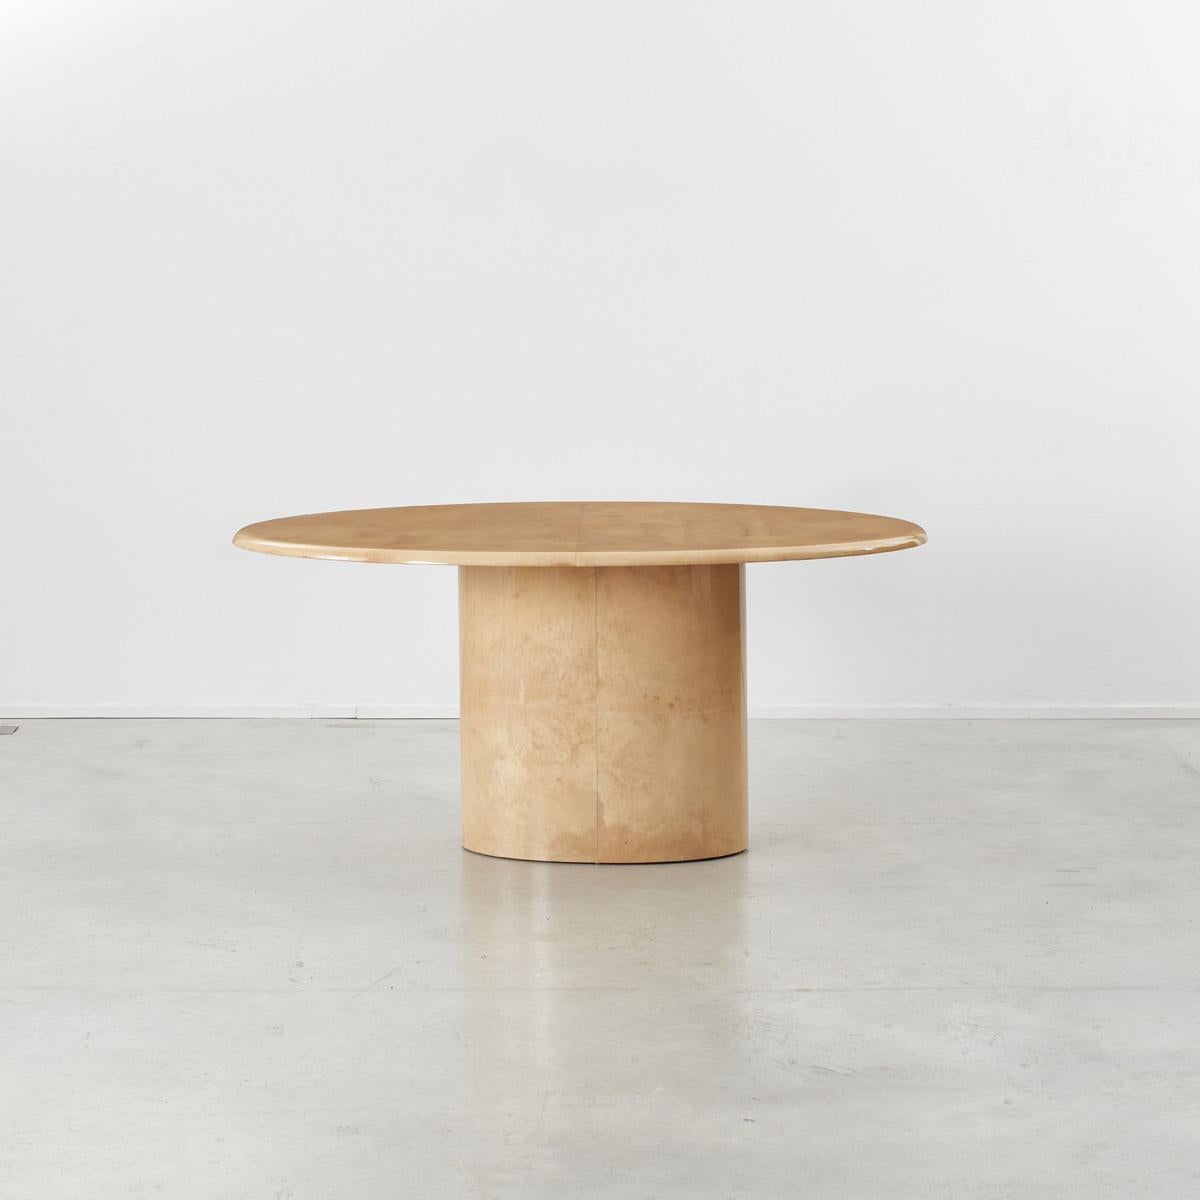 Aldo Tura (1909-1963) was a hands-on designer who experimented greatly with traditional craftsmanship hand applied craft processes and finishes out of his workshop in Milan. He is best known for his tables and lamps, which drew on shapes from the